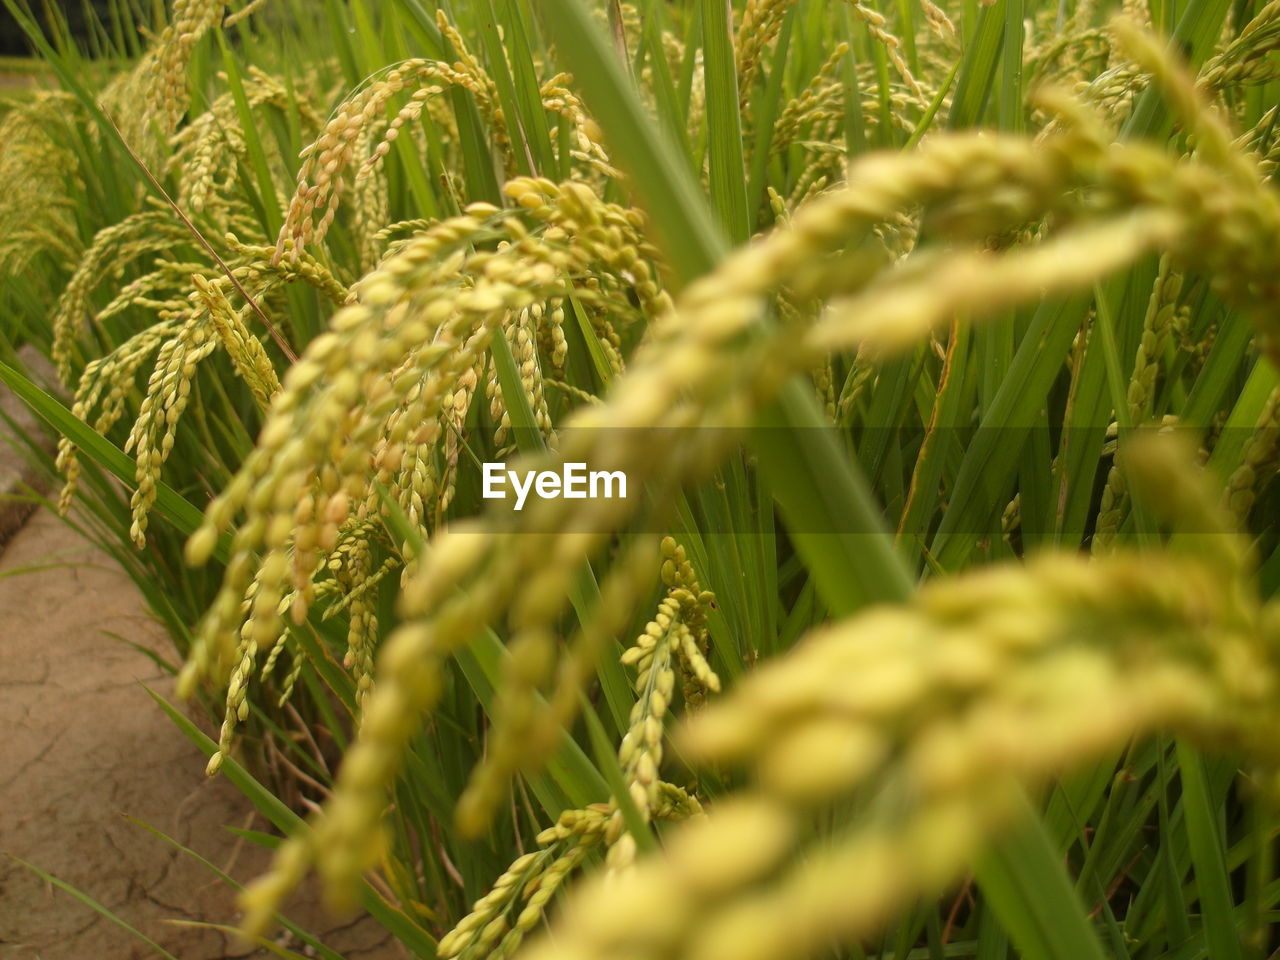 Rice is an important food crop for mankind